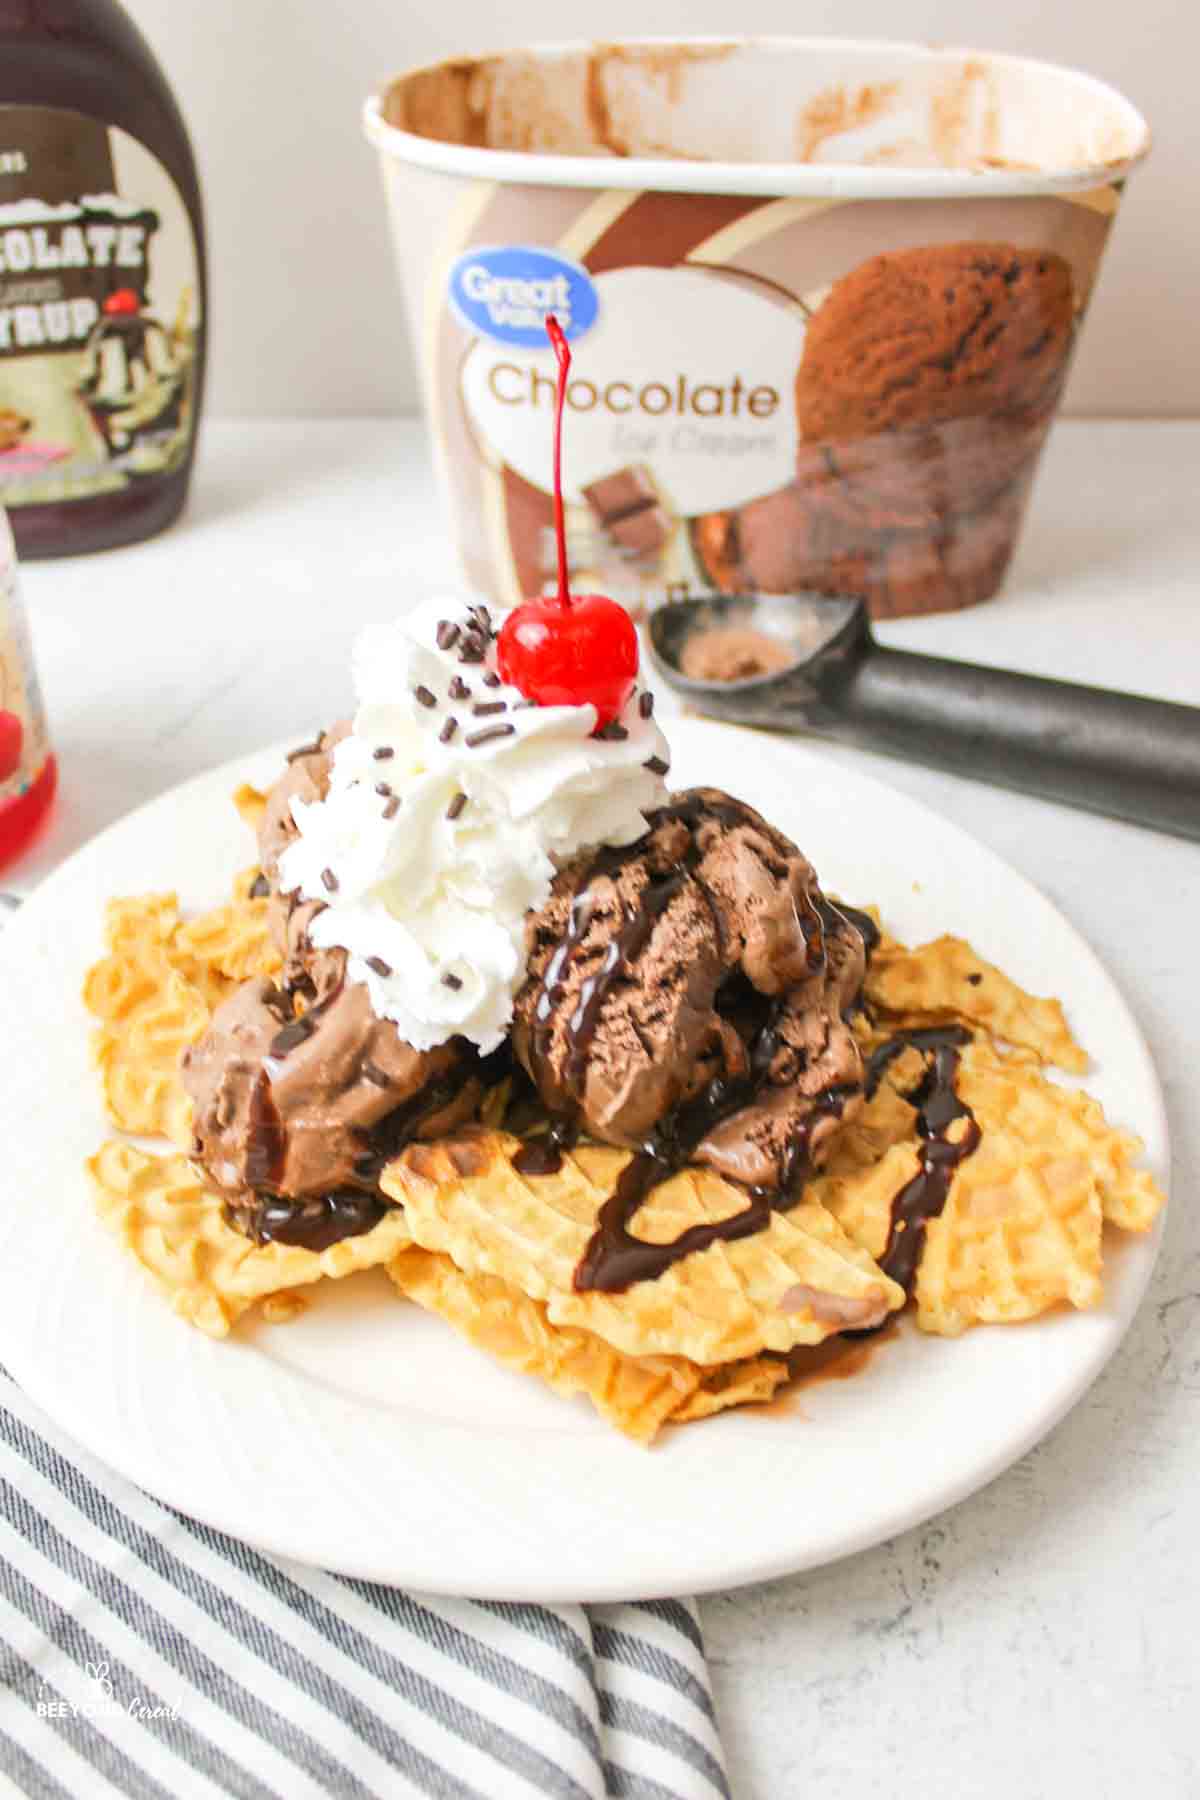 a chocolate ice cream nacho dessert on a plate with ice cream and scooper in background